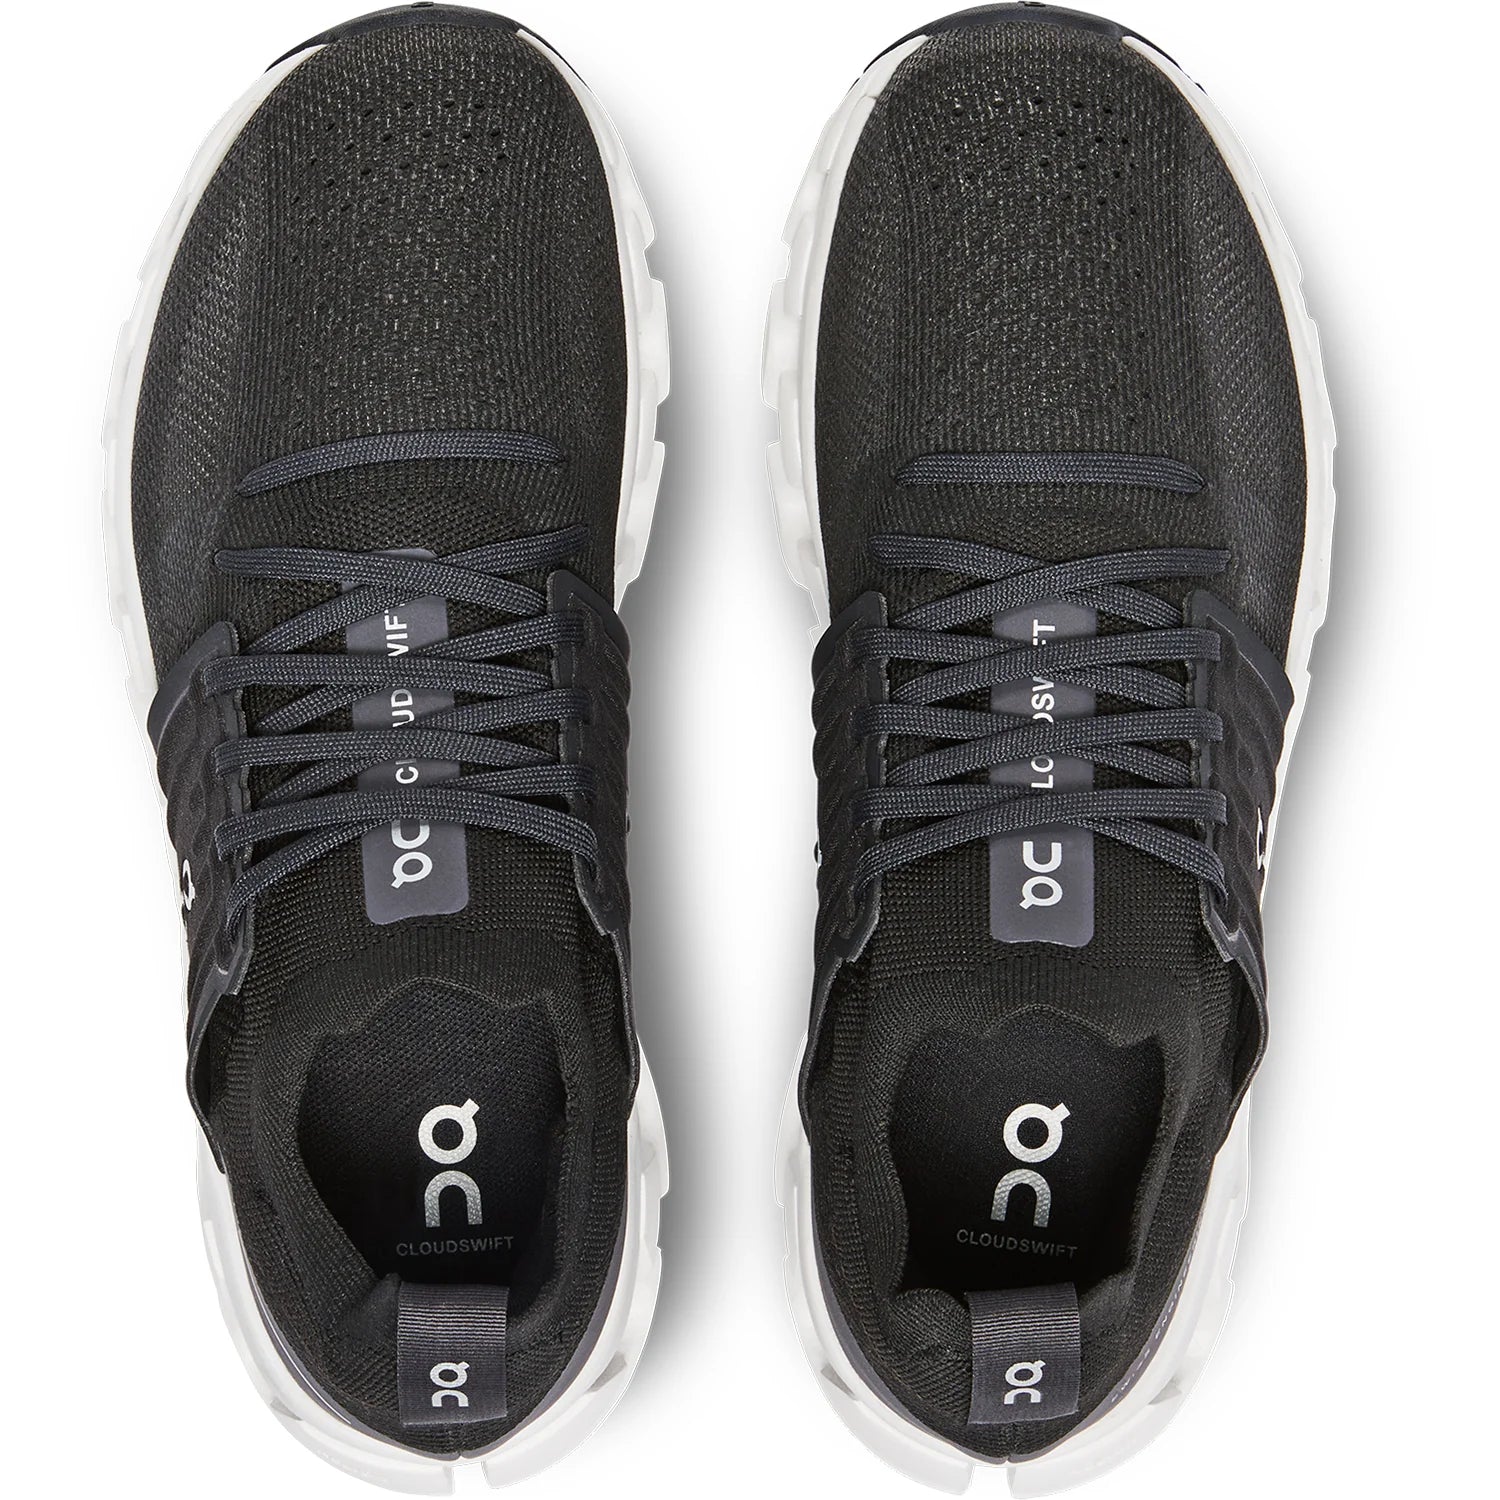 Top view of the Women's ON Cloudswift 3 in all Black